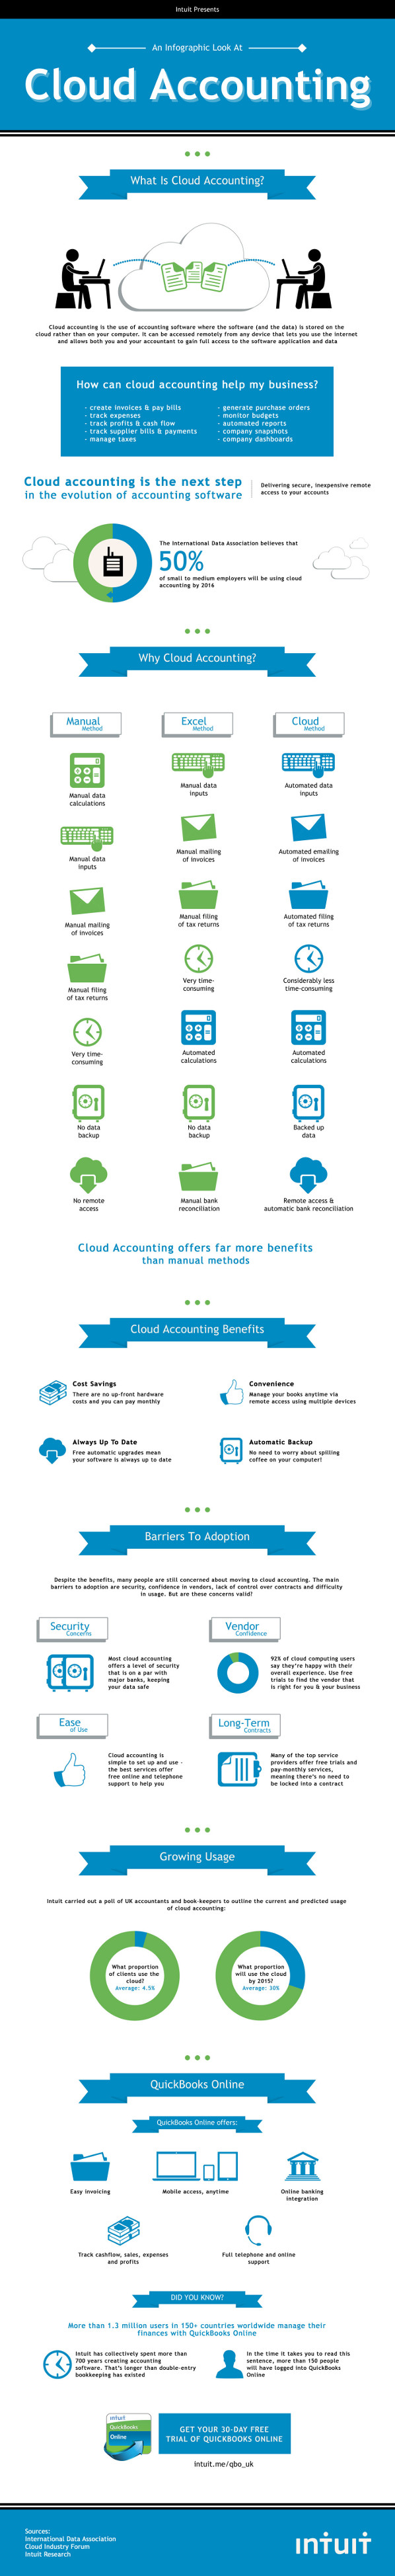 Cloud accounting infographic